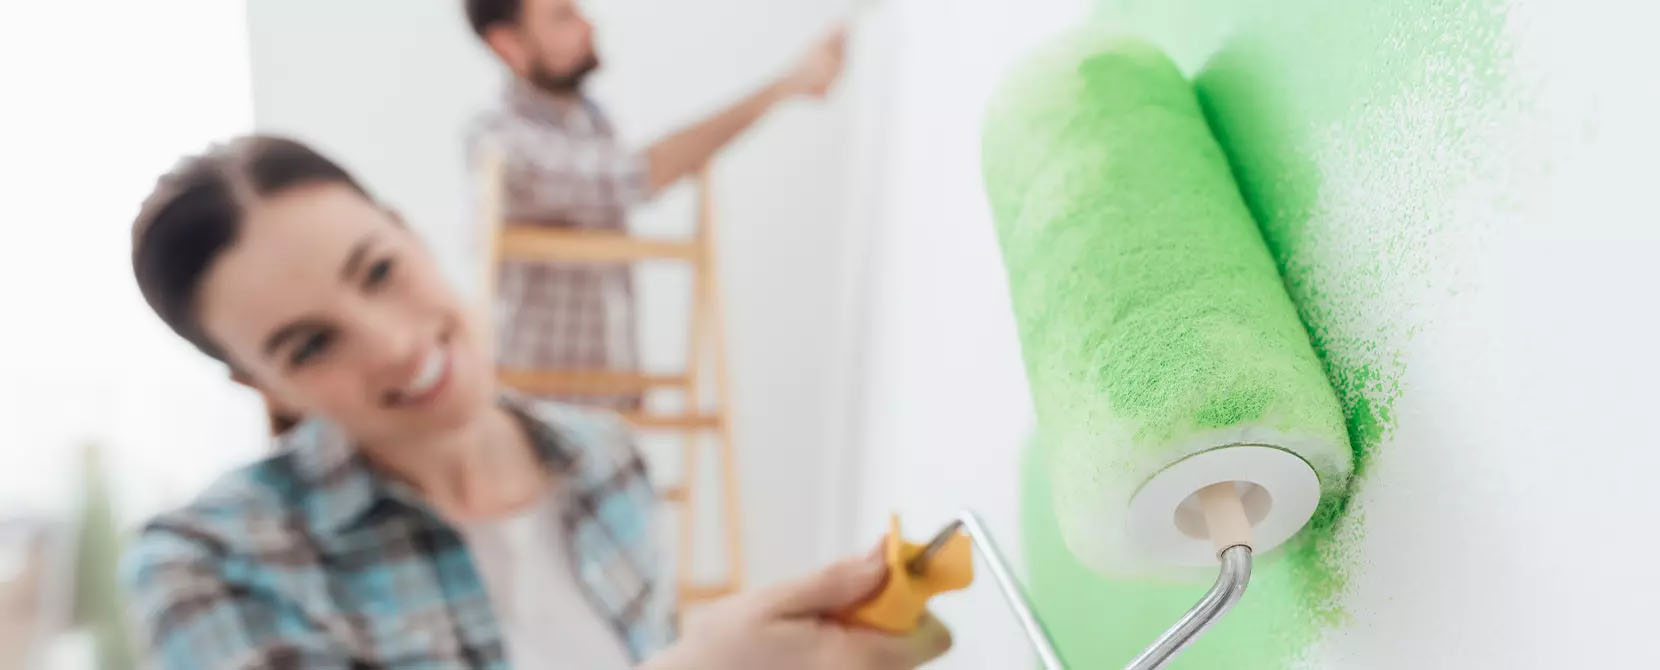 A paint which hardly spatters during painting using a paint roller